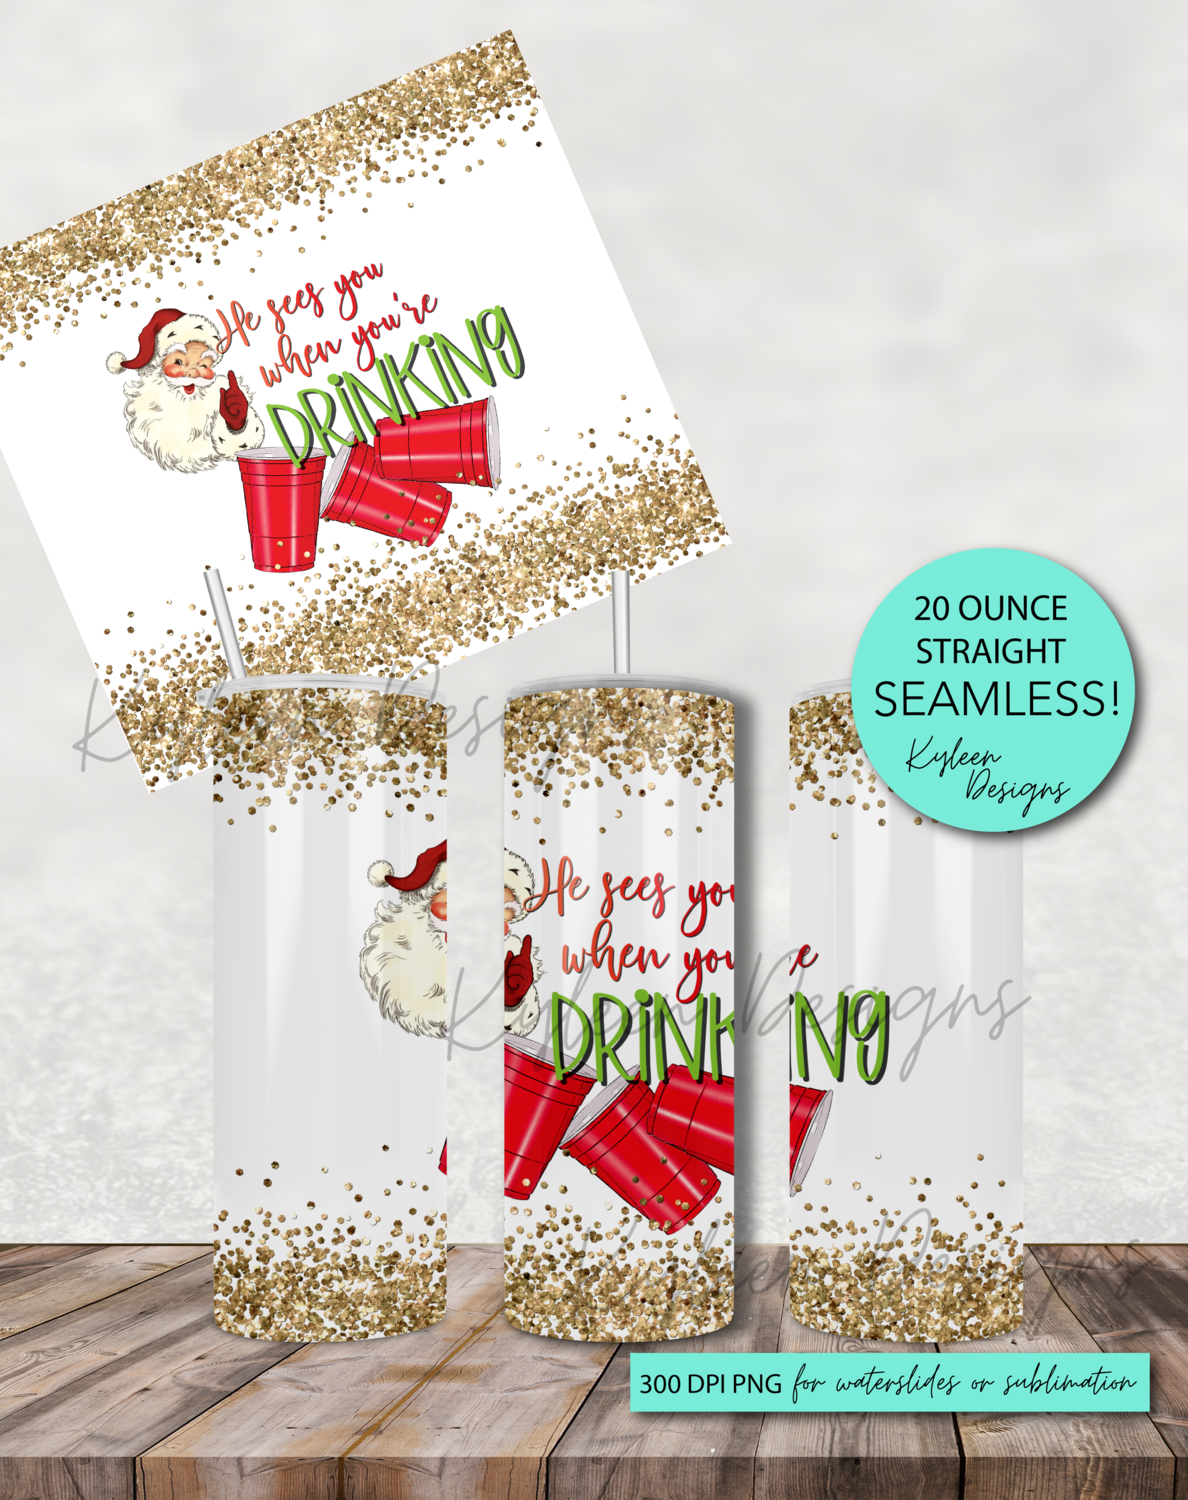 20 ounce Seamless He sees you when you're drinking wrap for sublimation, waterslide High res PNG digital file